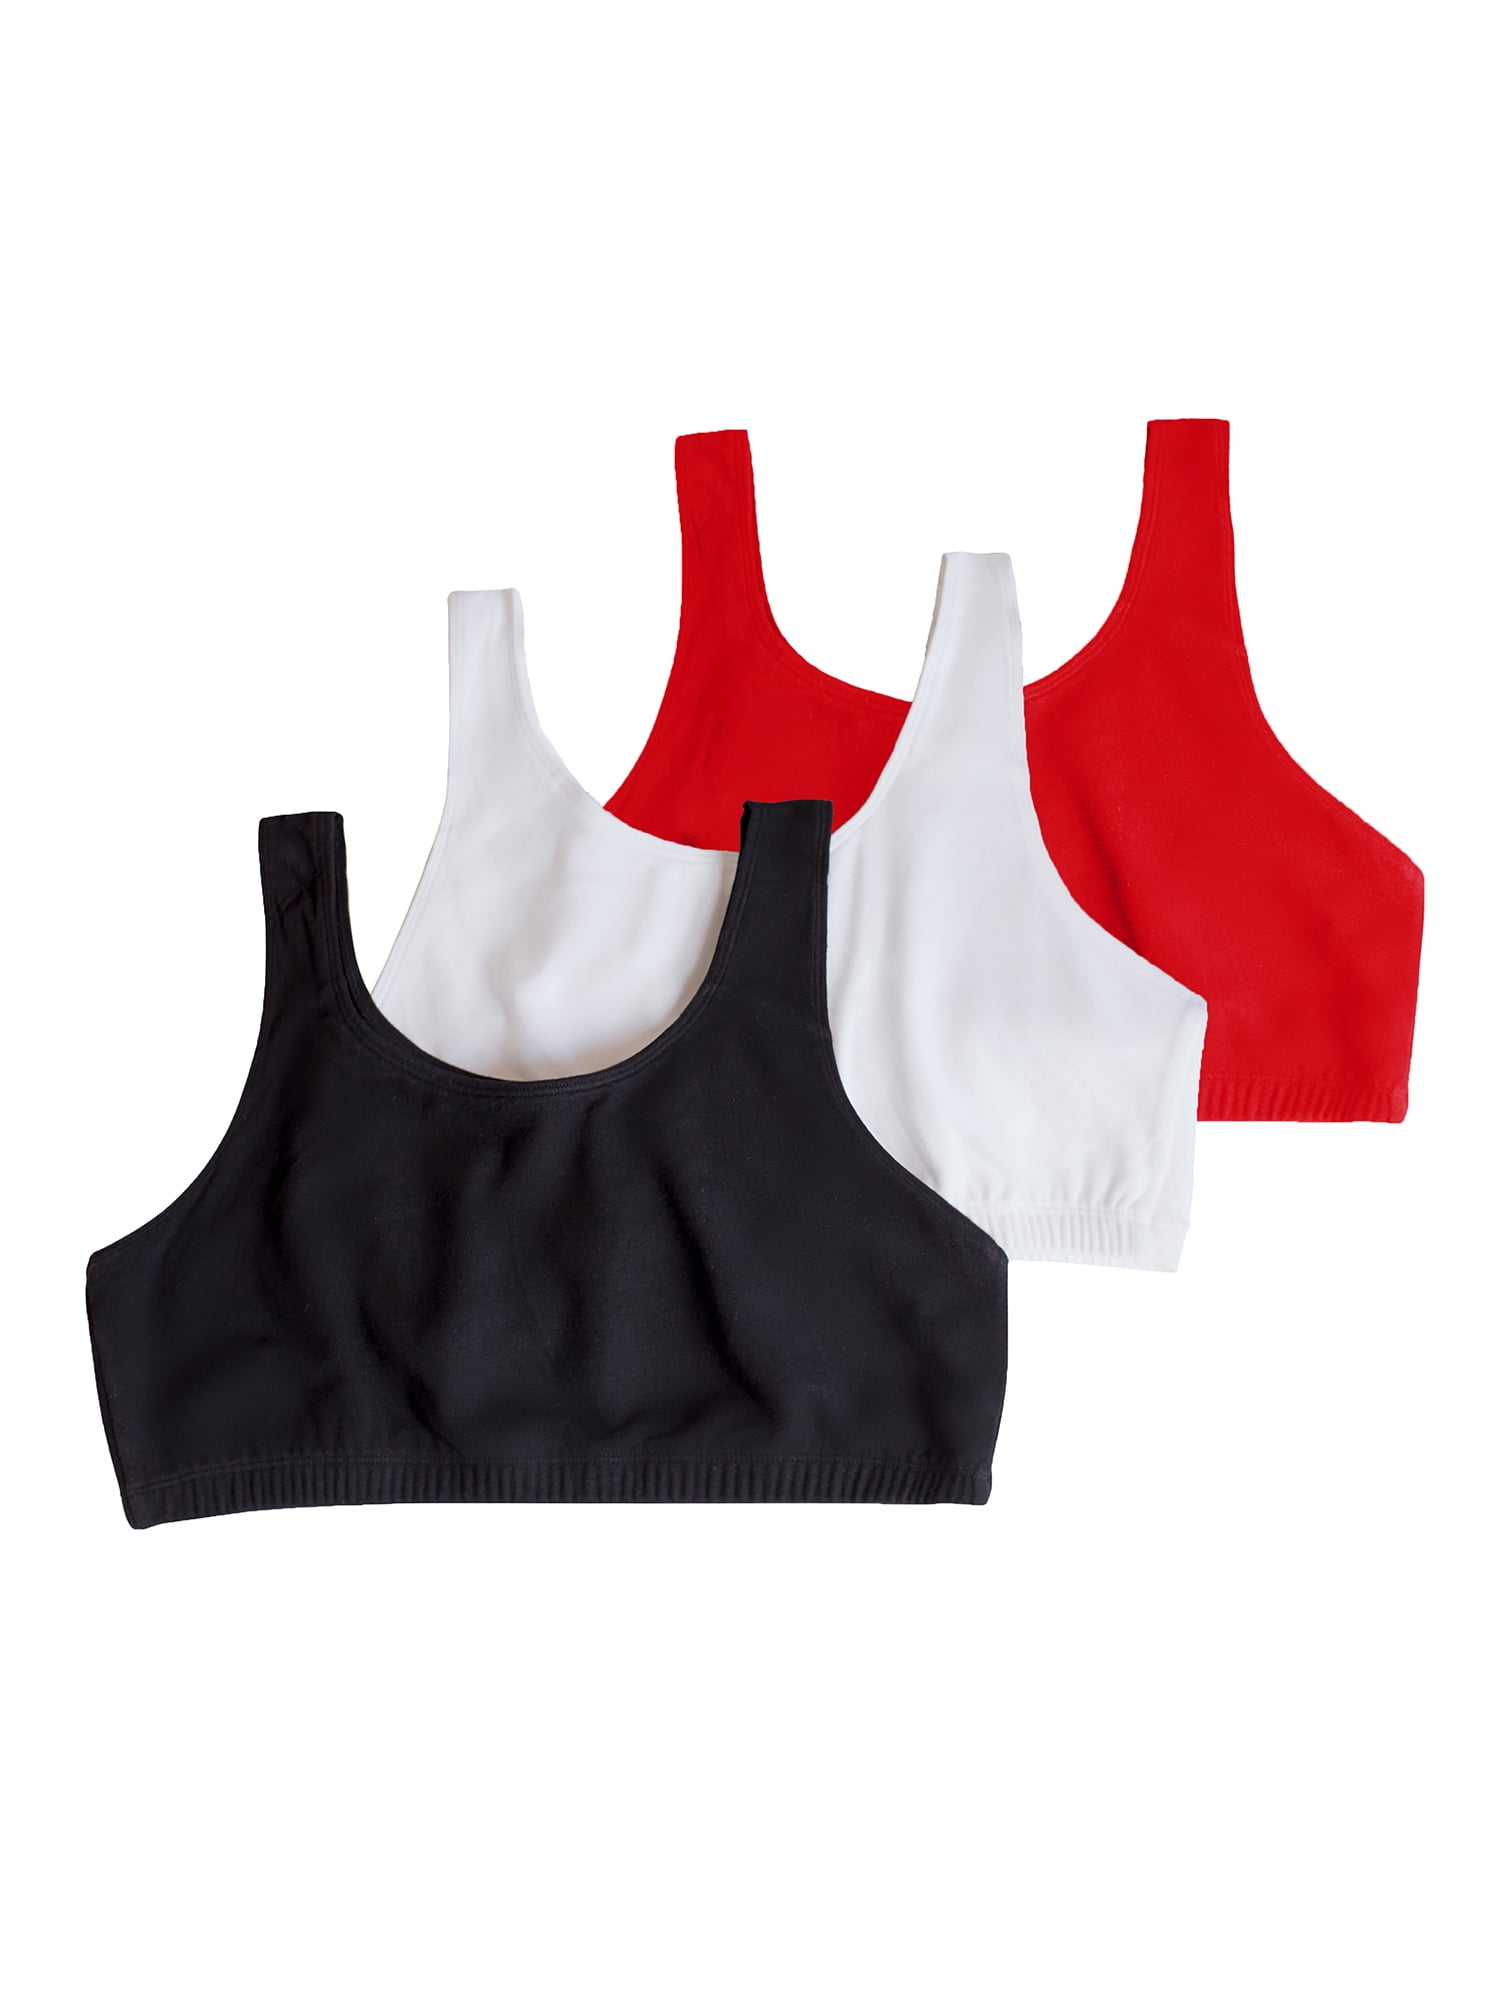 Fruit of the Loom Women's Built Up Tank Style Sports Bra Red Hot/White/Black 50 